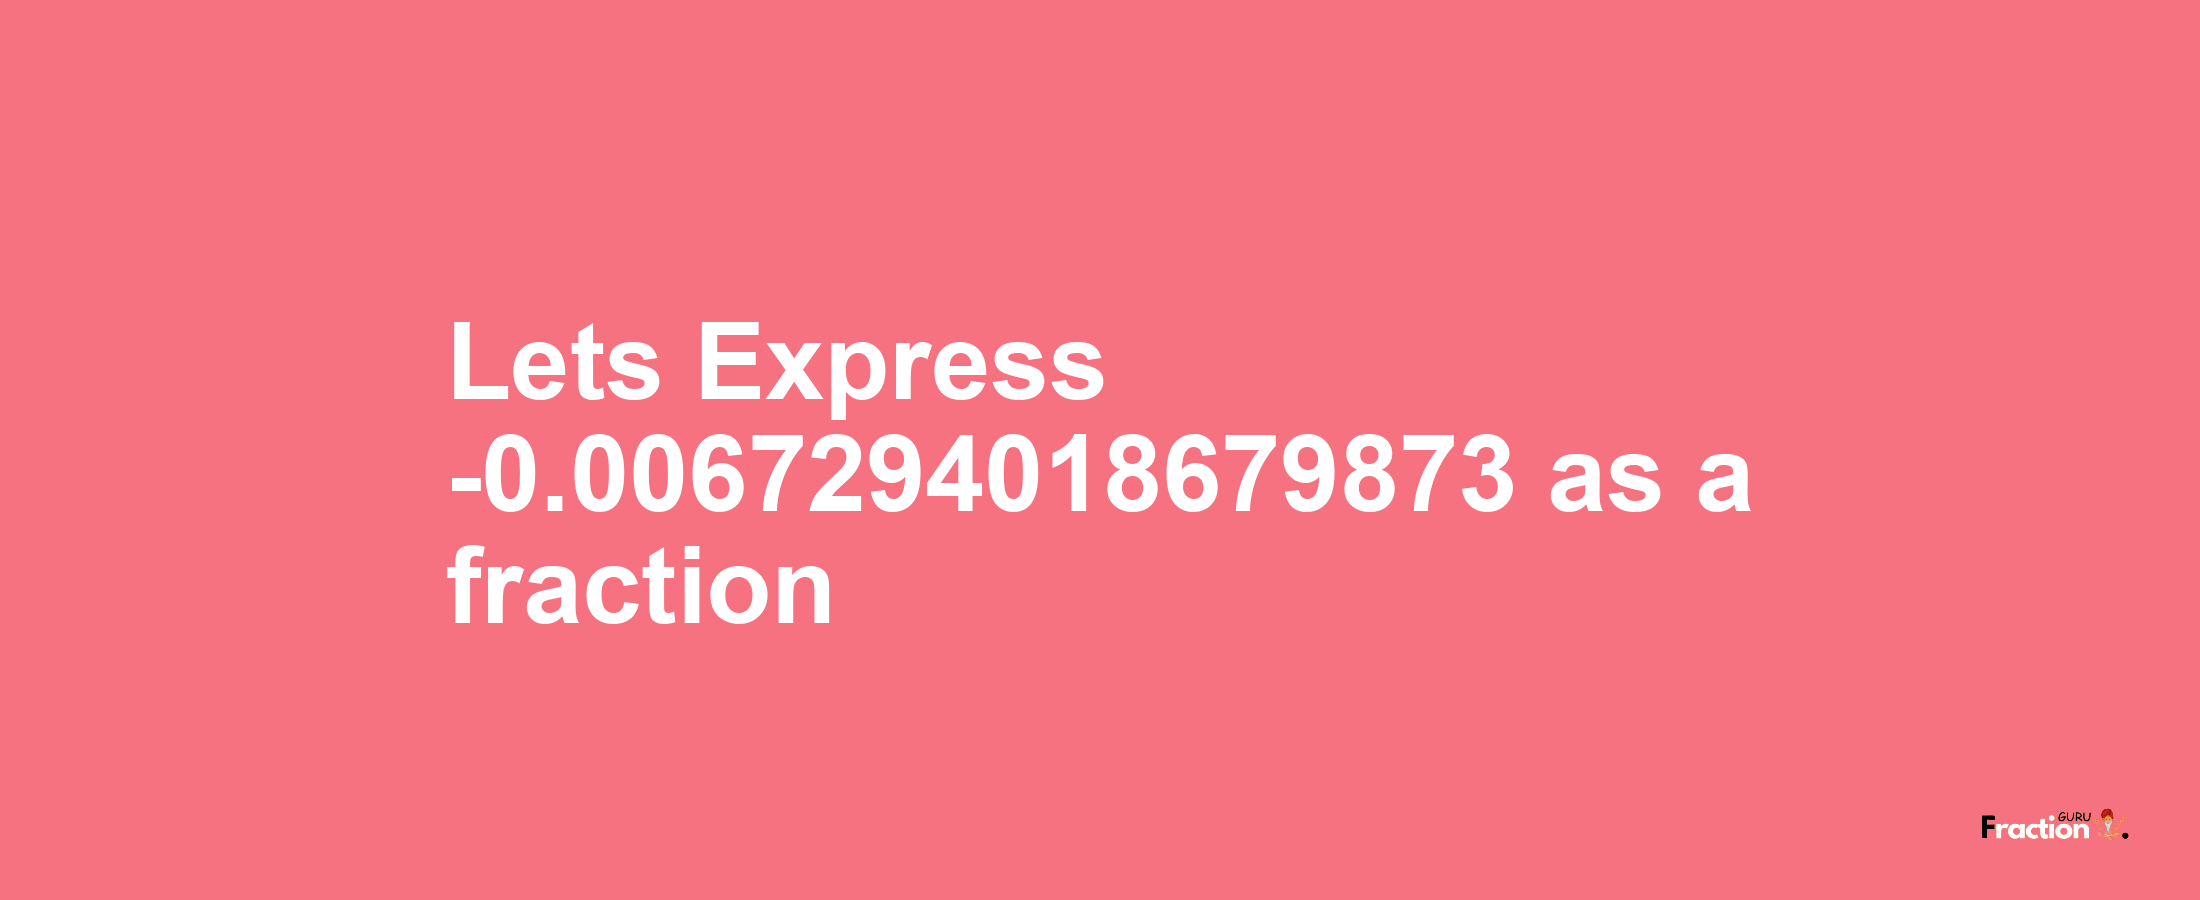 Lets Express -0.0067294018679873 as afraction